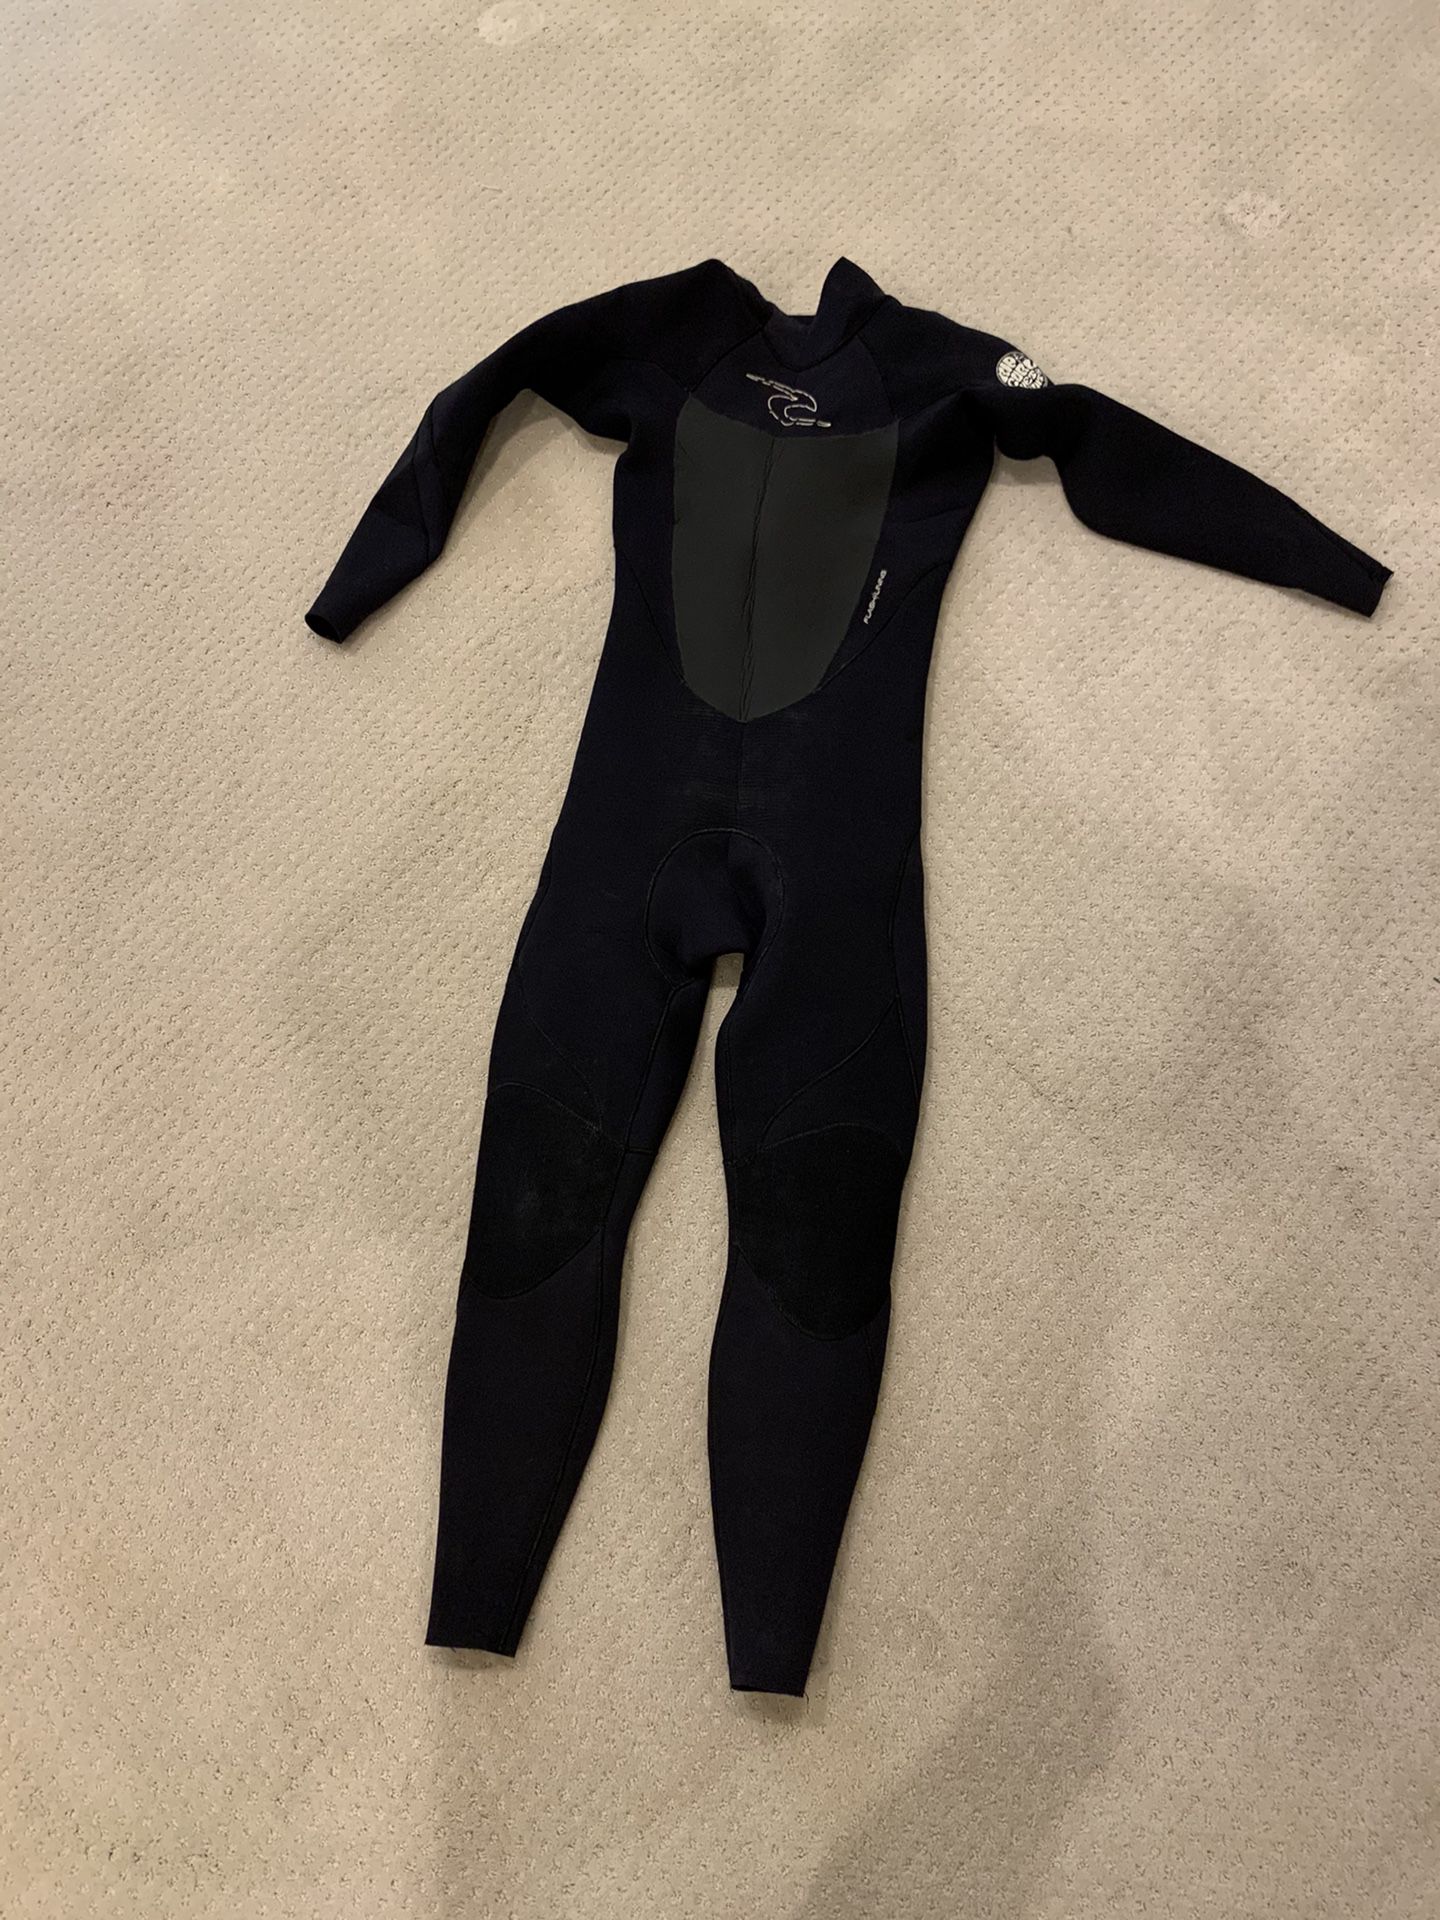 Rip Curl Men’s 3/2 Wetsuit Size Small